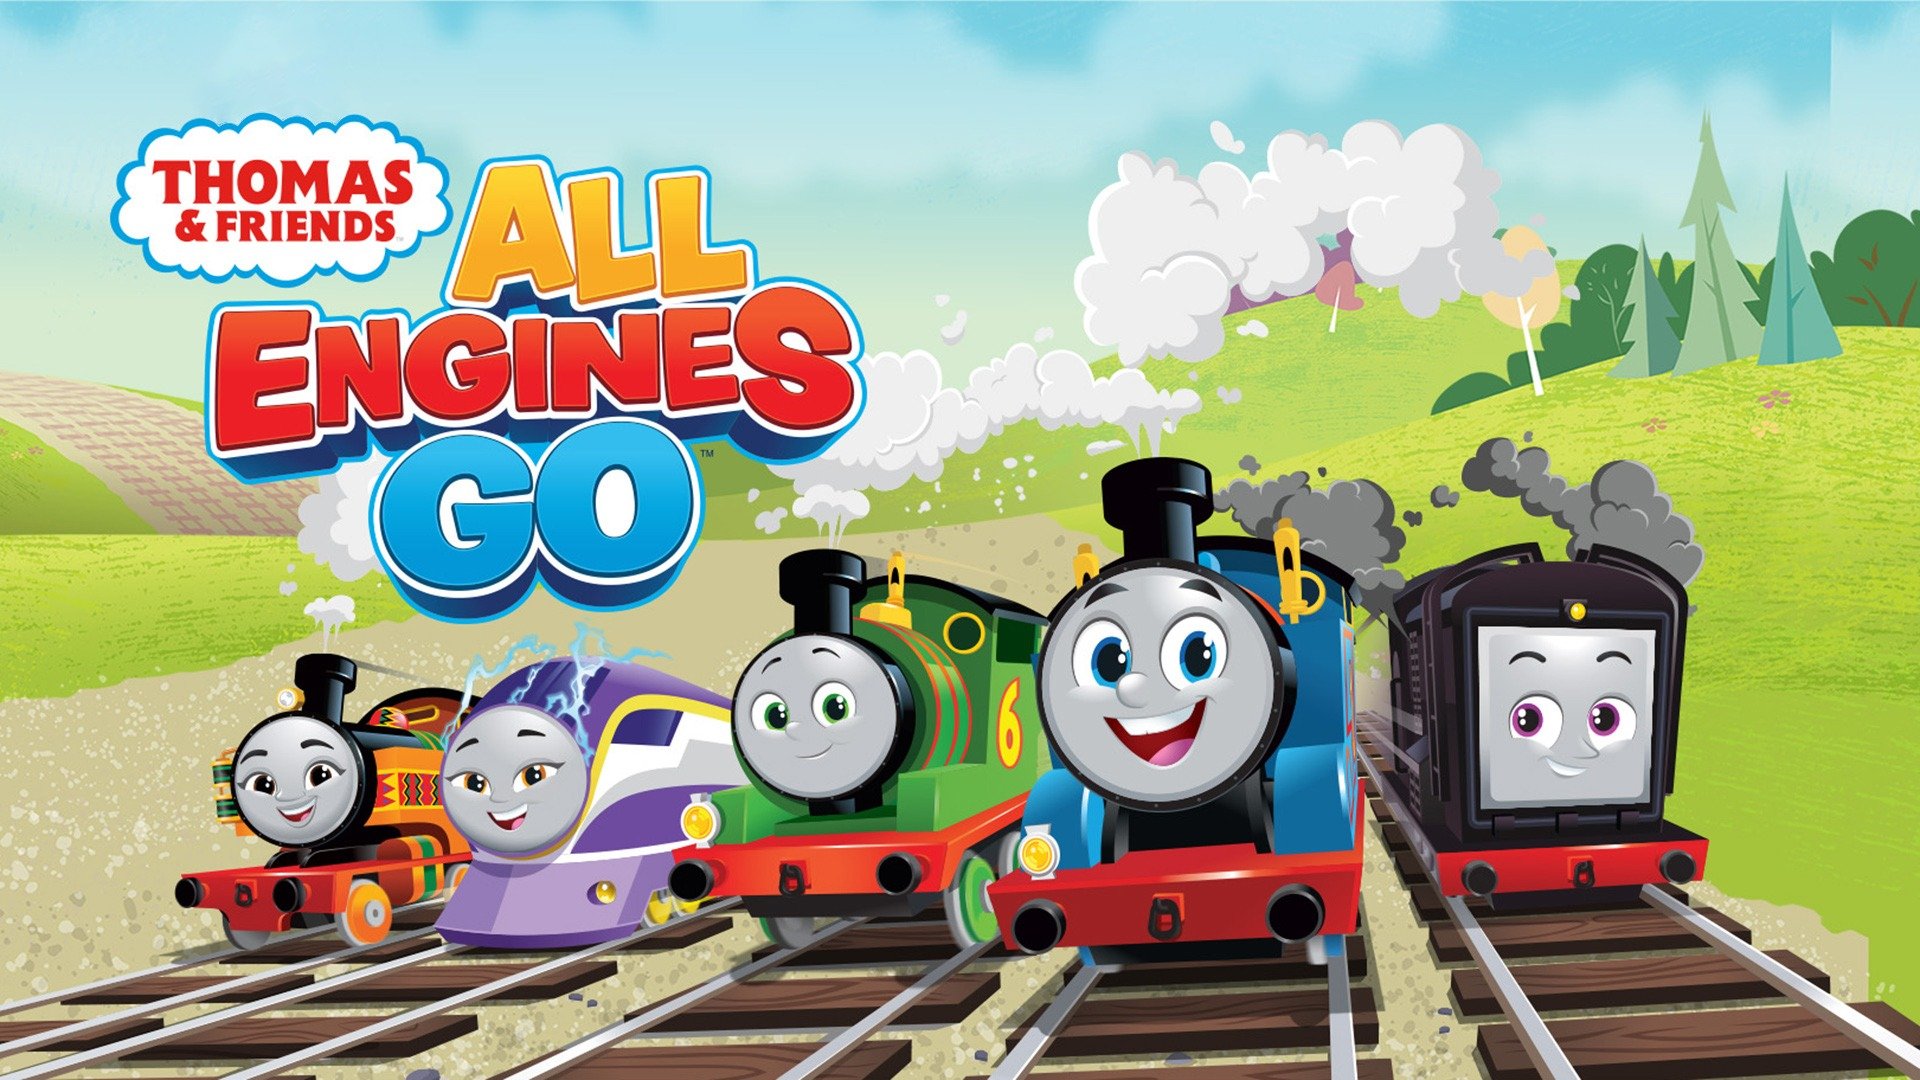 Thomas & Friends: All Engines Go - Rotten Tomatoes